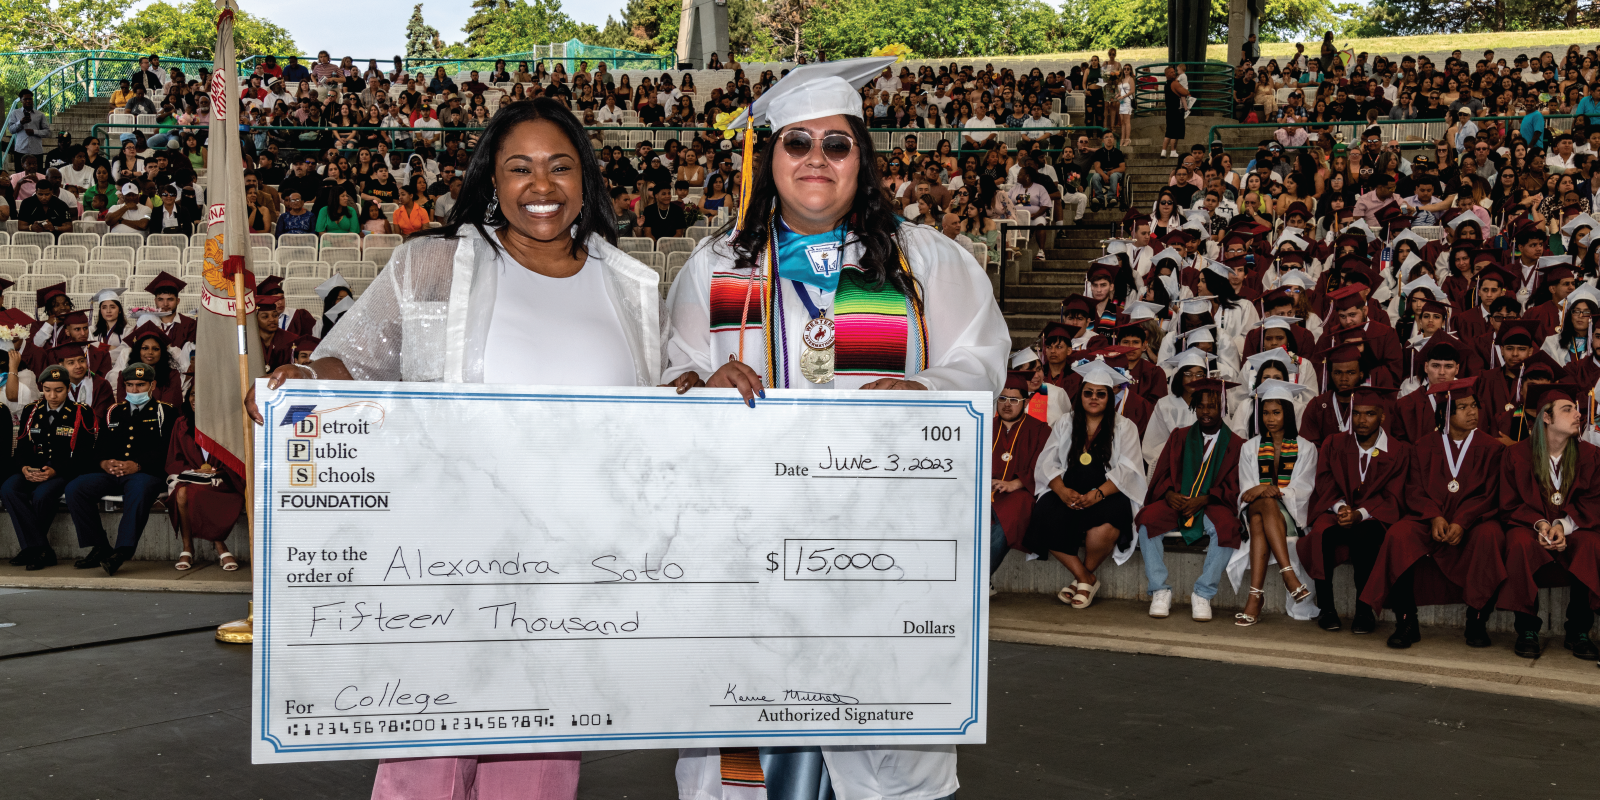 $45,000 in scholarship awards from the DPS Foundation for the Pernick Prize